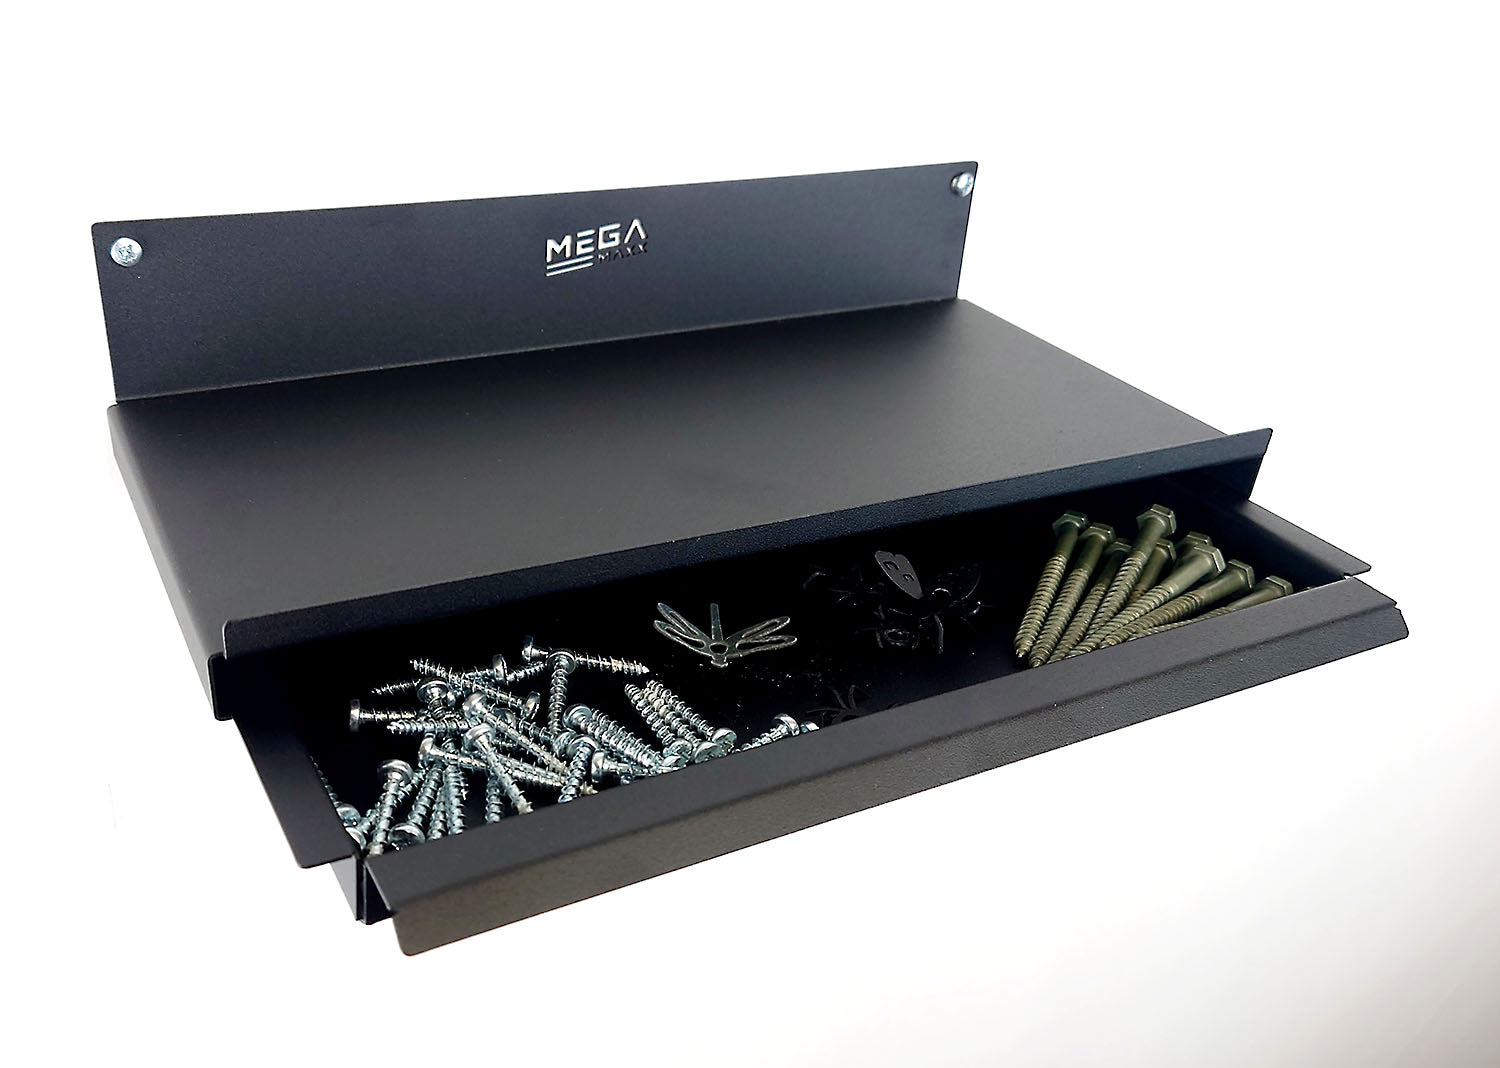 Lightweight Tool Shelf with Drawer - Store Tools, Screws & Accessories - Textured Black Finish - Shelf with a drawer of screws